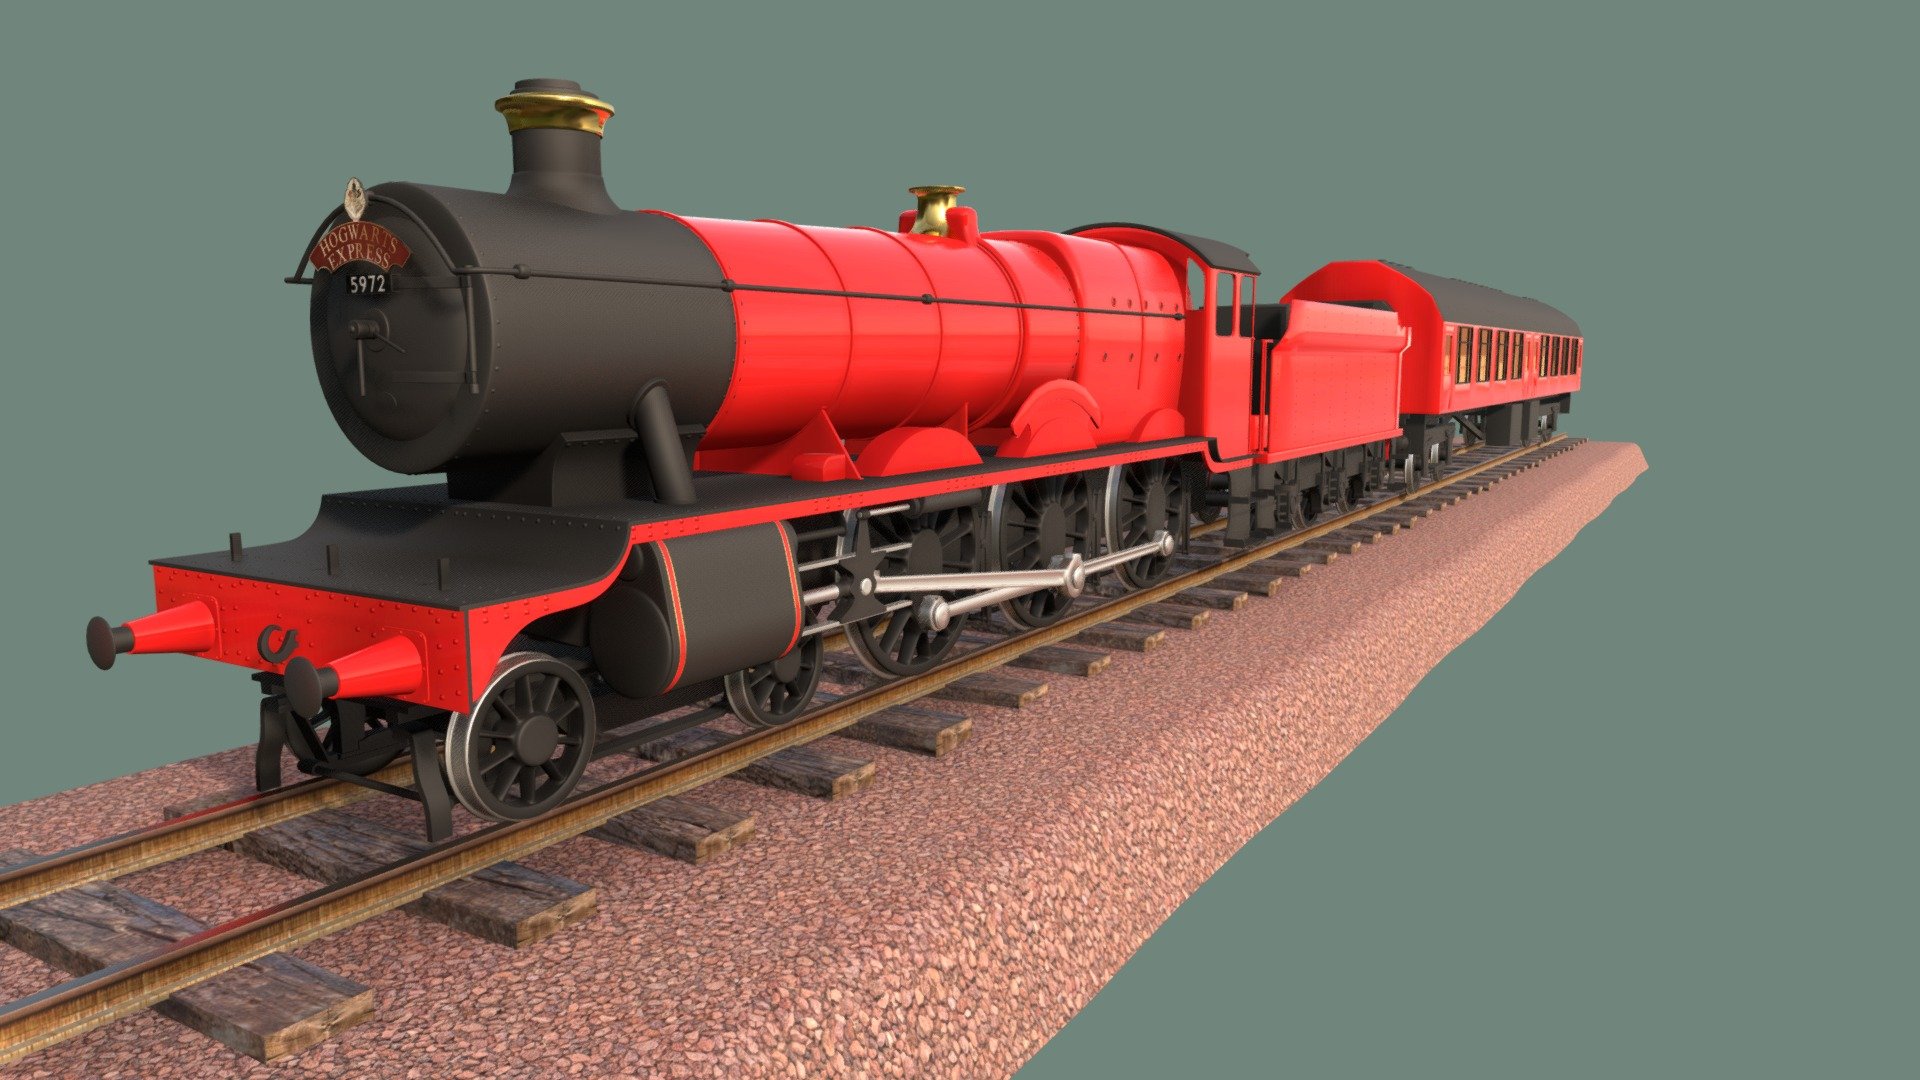 A high polly model of locomotive Olton Hall 4900 aka Hogwarts Express.

On model are used mainly materials and few textures 3d model